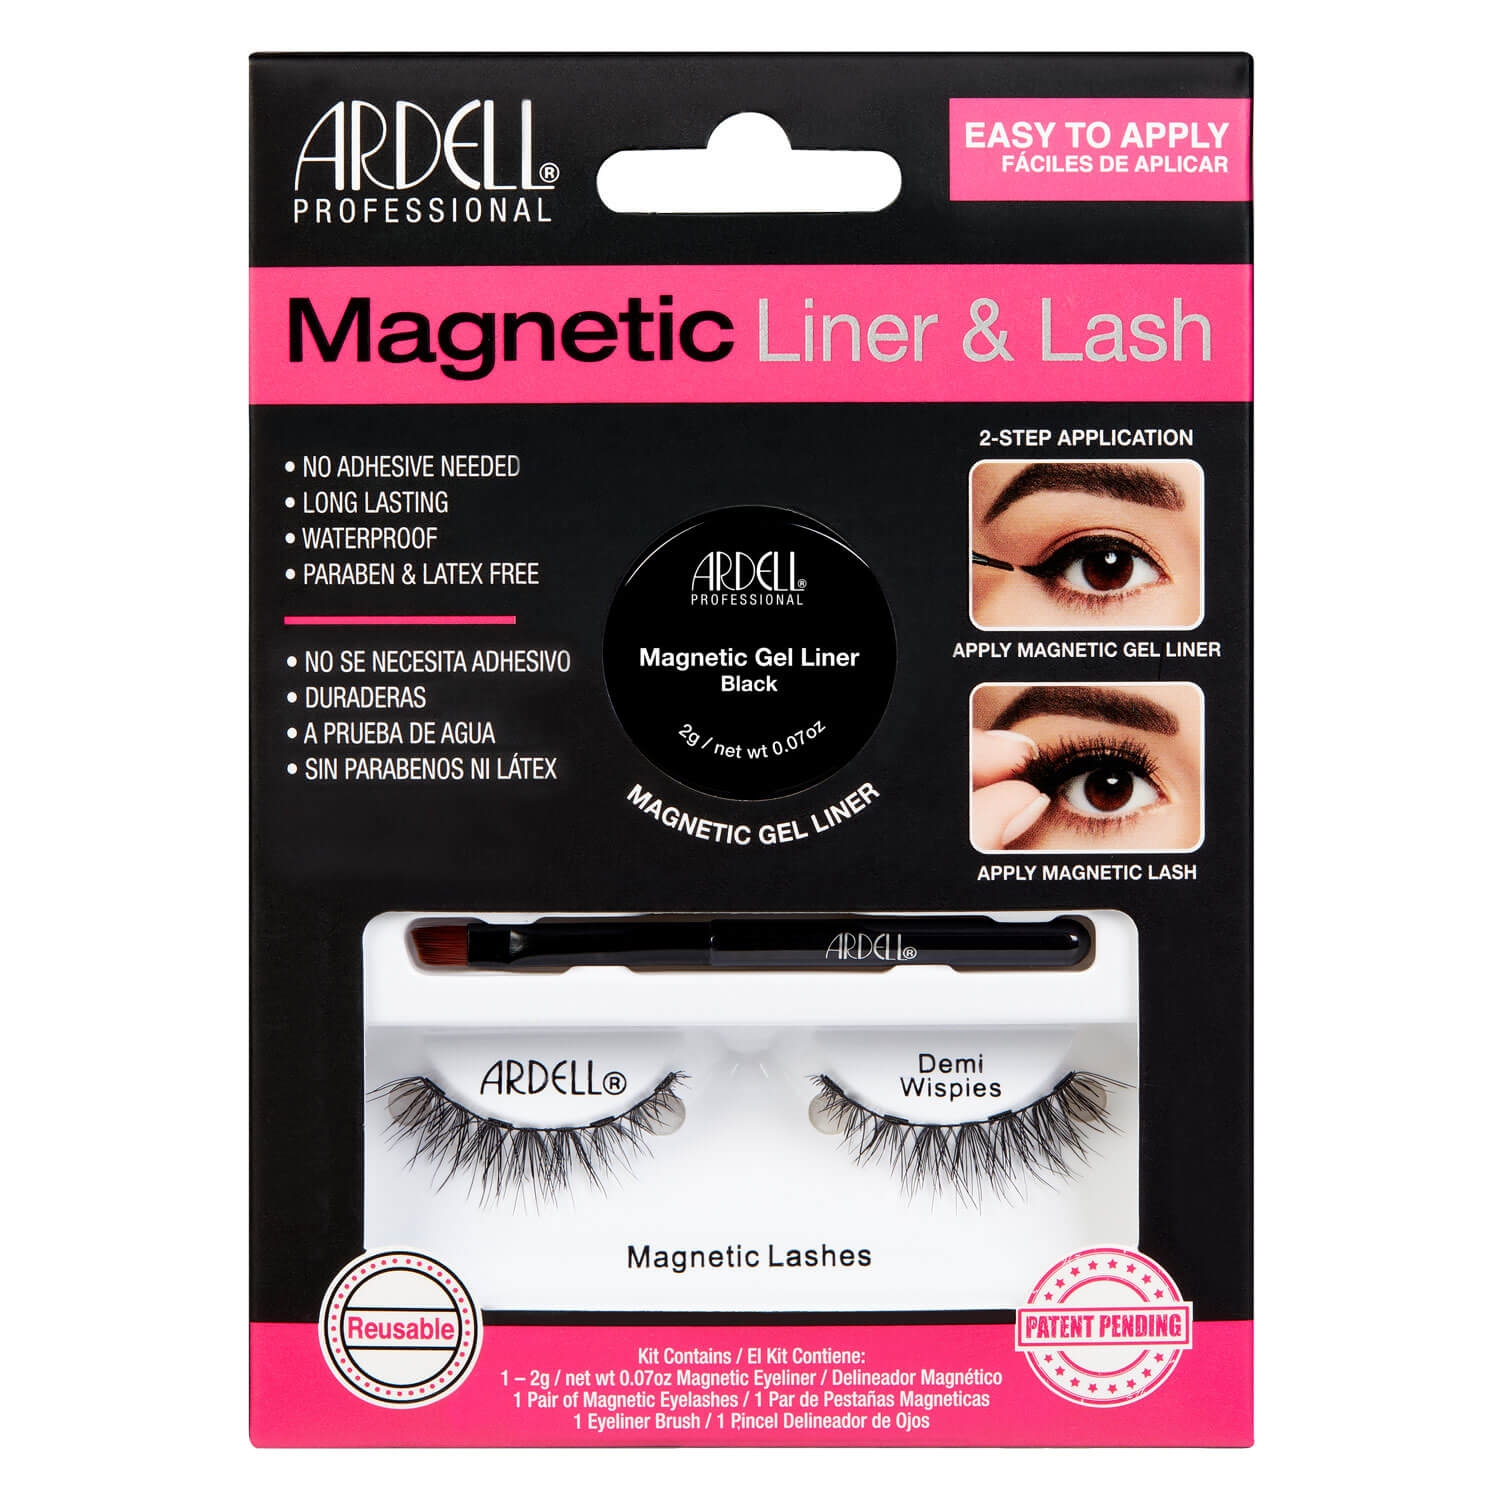 Product image from Ardell Magnetic - Liner & Lash Demi Wispies